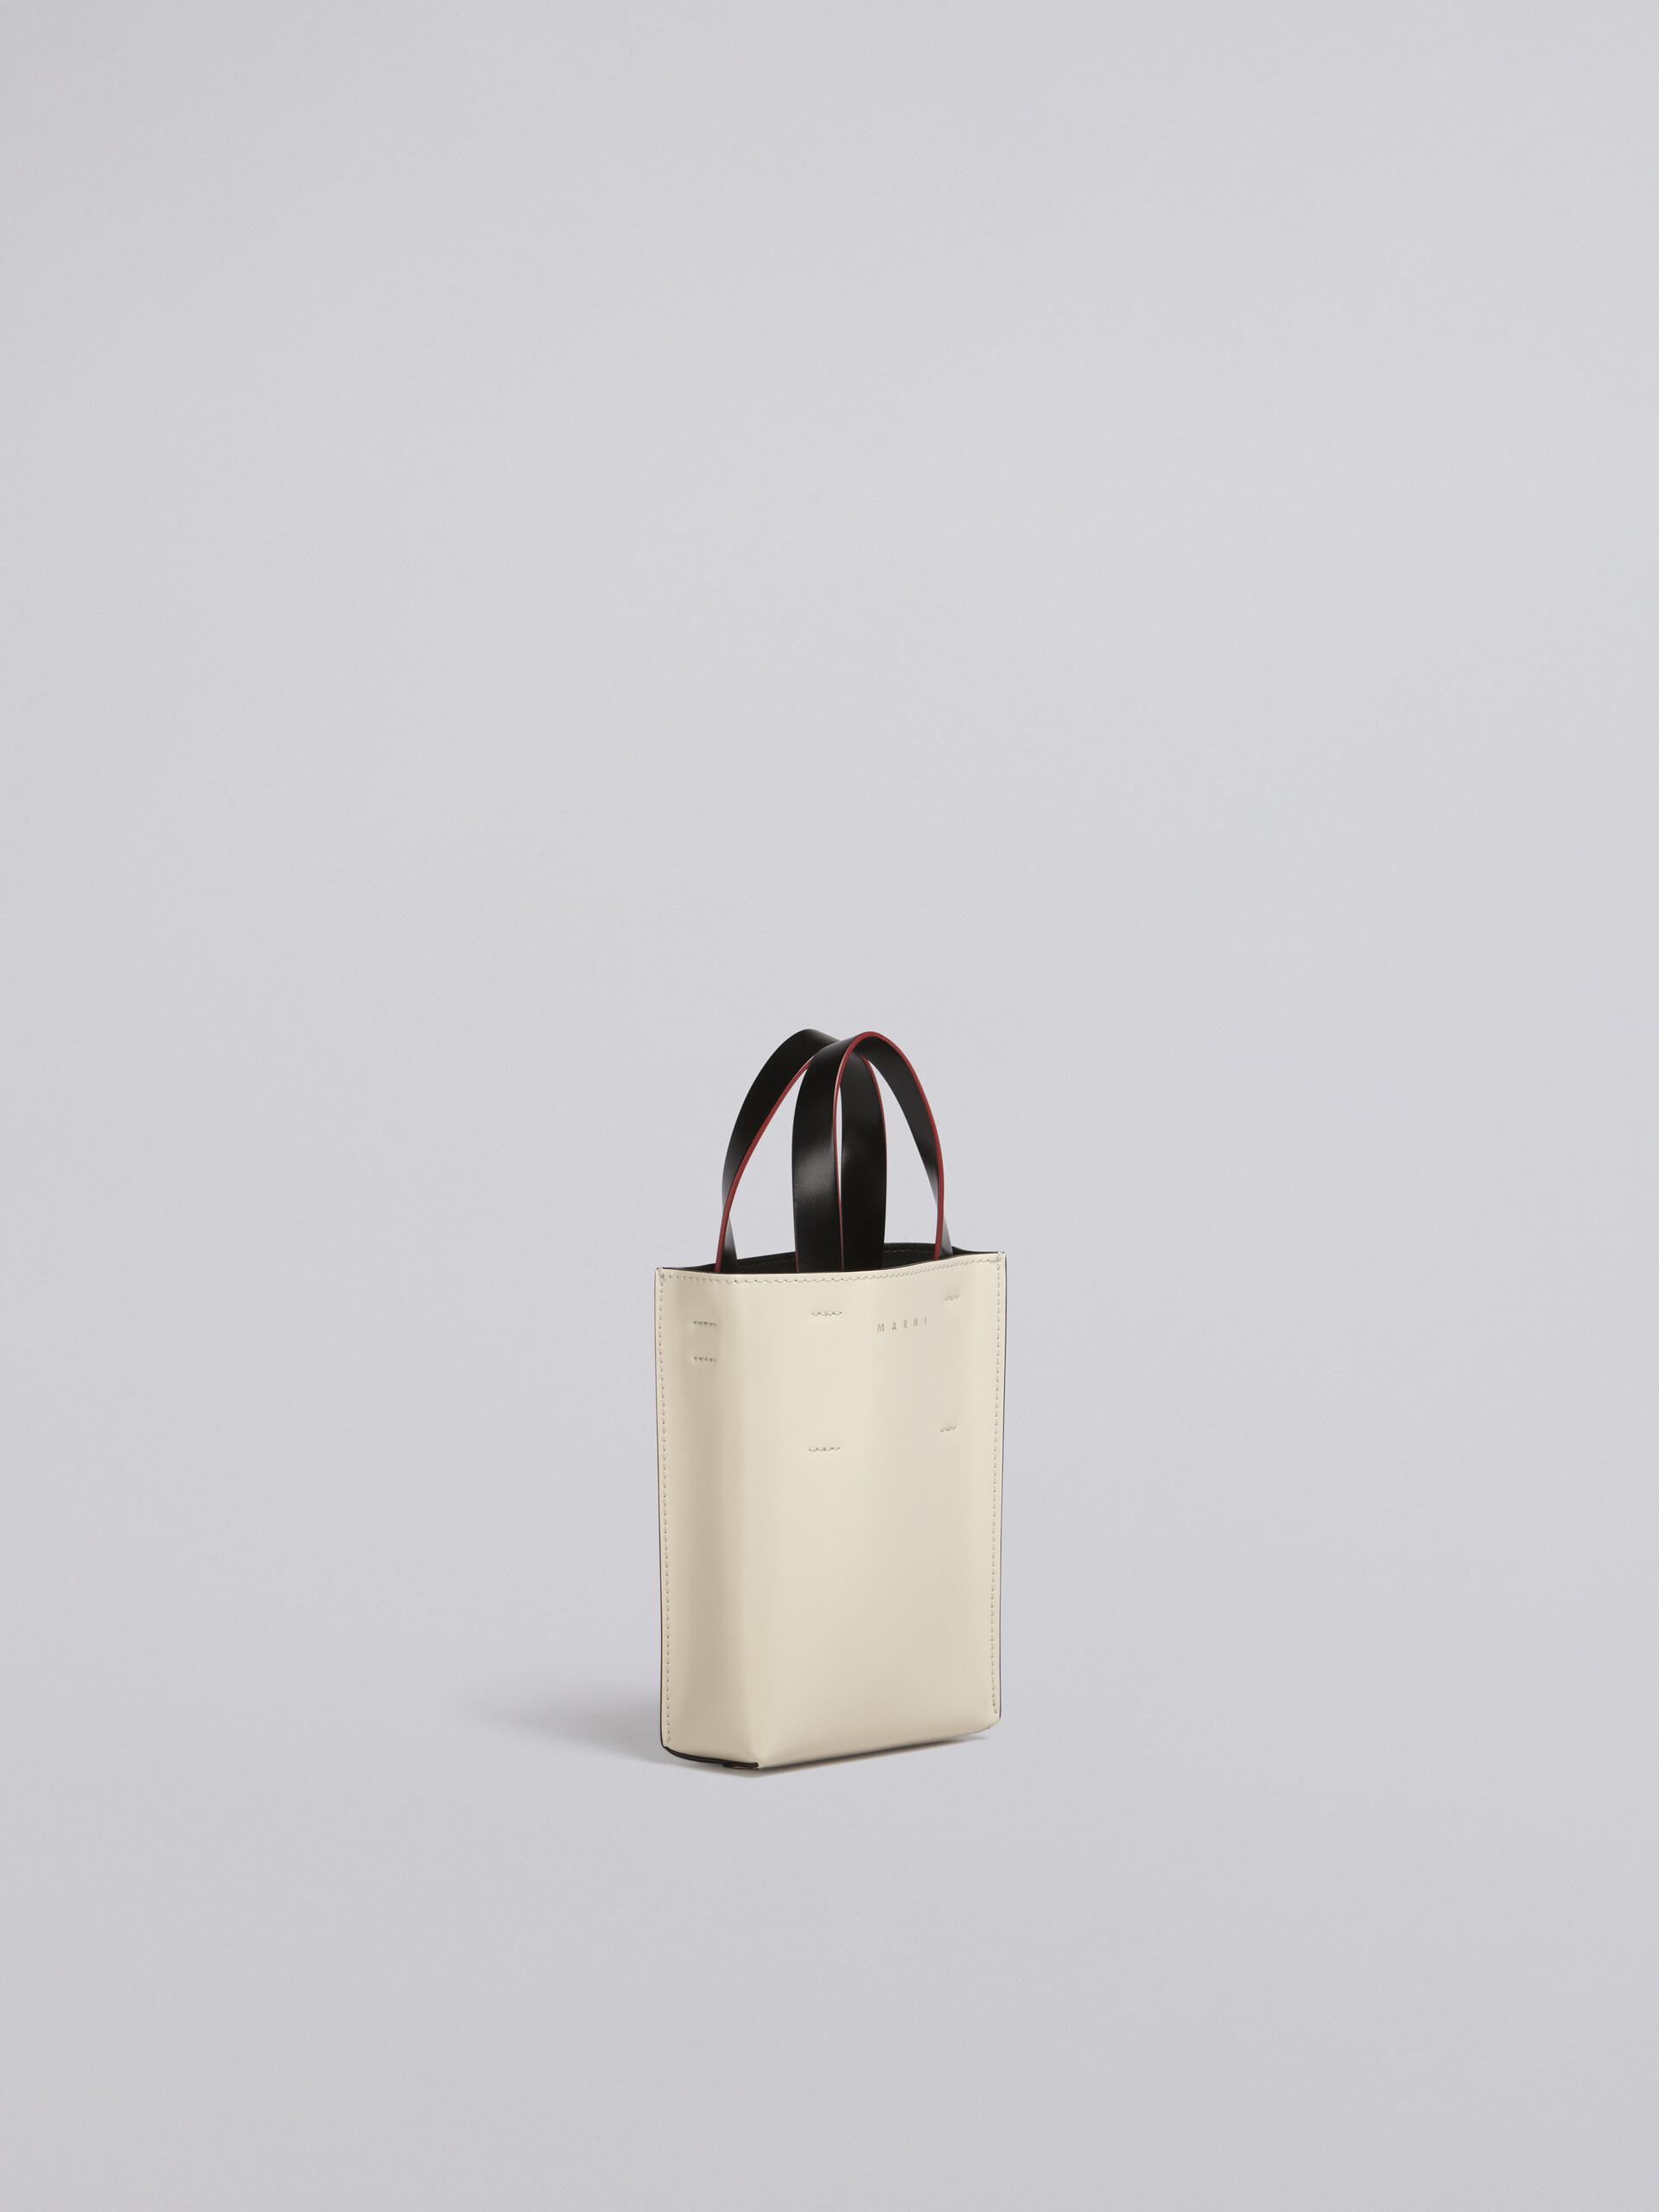 Nano MUSEO shopping bag in beige and pink smooth calfskin with shoulder strap - Shopping Bags - Image 4